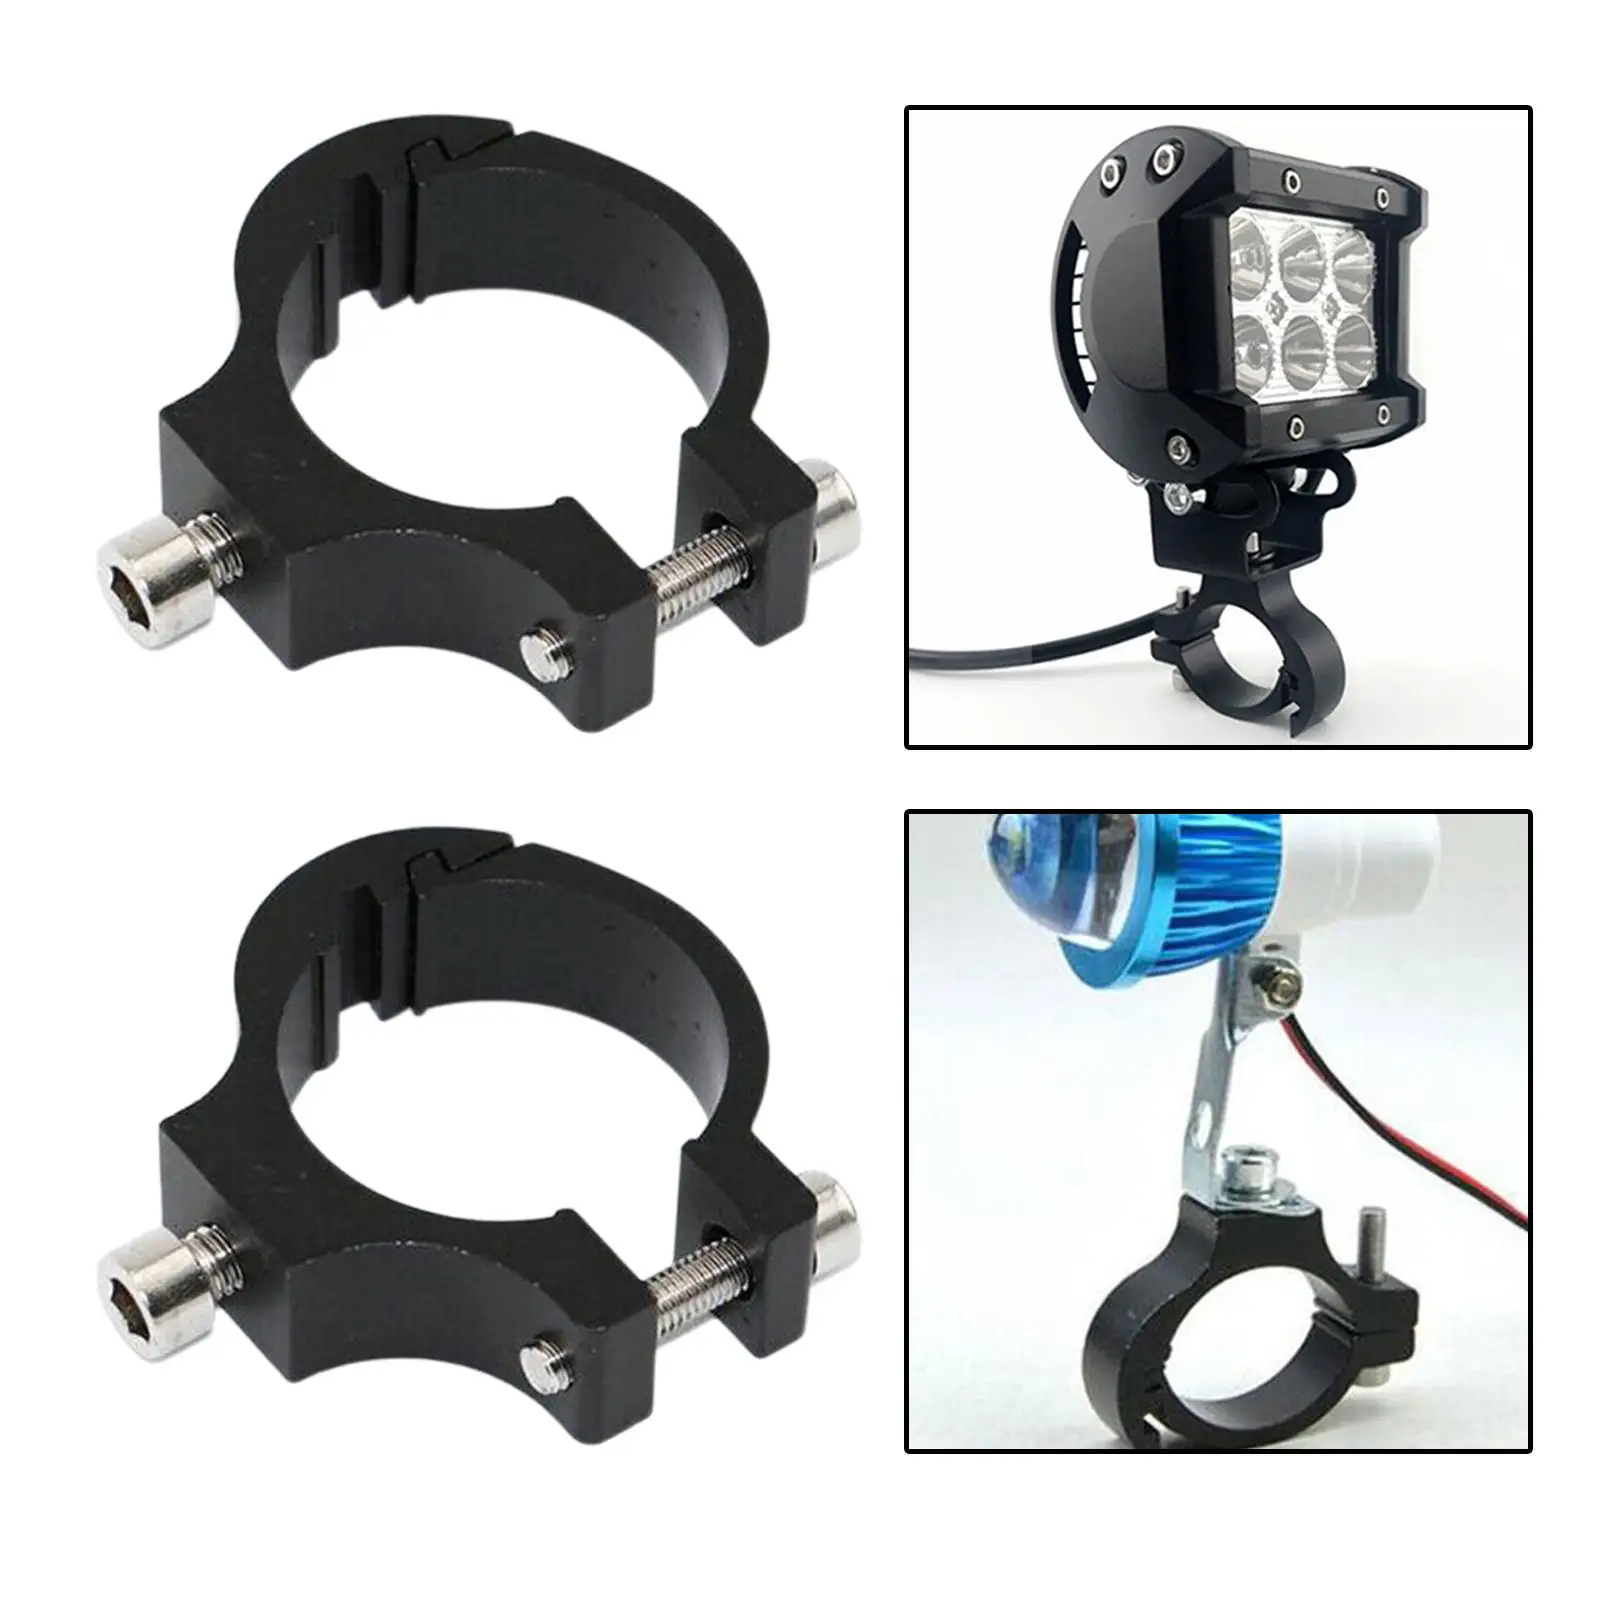 Universal Motorcycle Headlight Bracket Mount Aluminium Alloy Adjustable Lightweight Durable Fit for Motorcycle Touring Driving